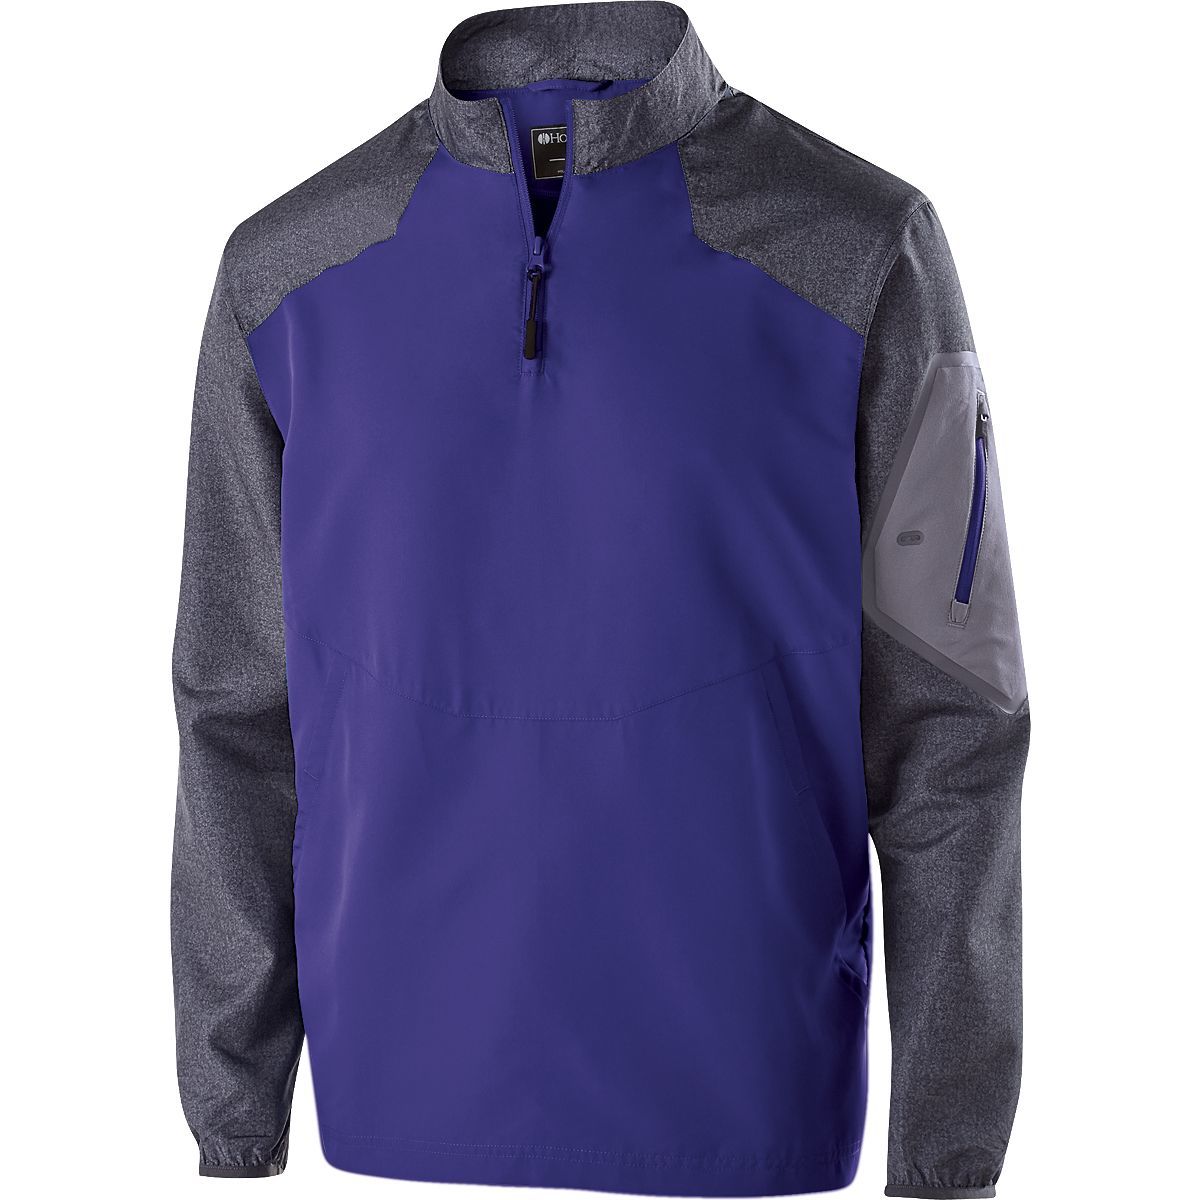 Holloway Raider Pullover in Carbon Print/Purple  -Part of the Adult, Adult-Pullover, Holloway, Outerwear, Corporate-Collection product lines at KanaleyCreations.com